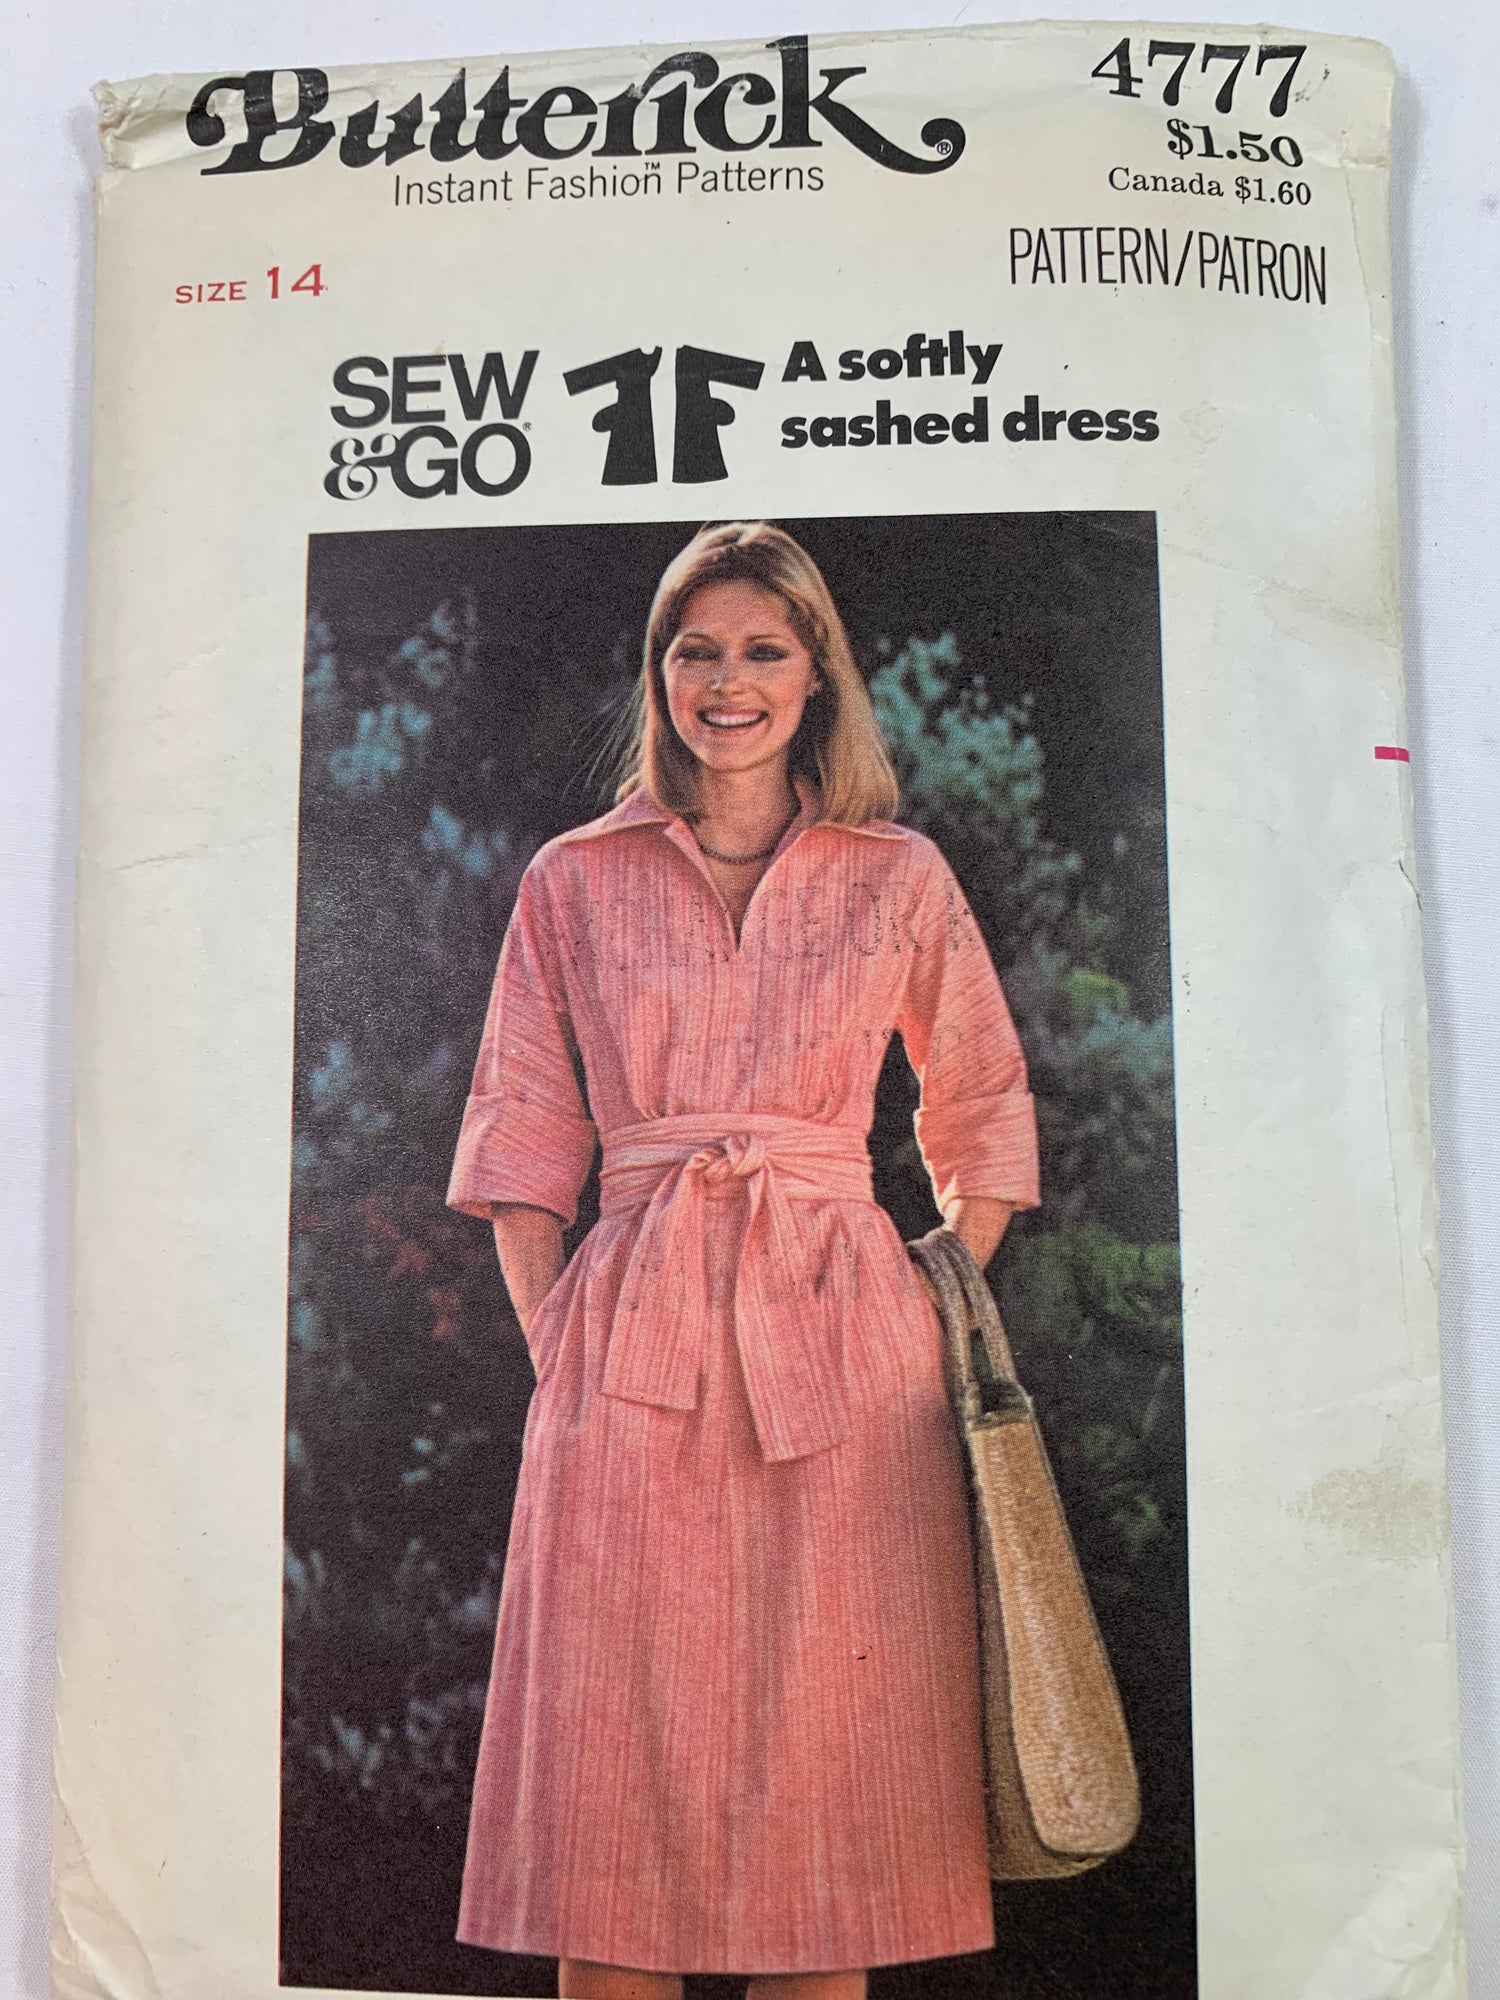 Butterick Sewing Pattern 4777 Misses' Dress, Elbow Kimono Sleeves,  Semi-Fitted, Flared, Collar, Pockets, Tie, Size 14, Cut, Vintage 1970